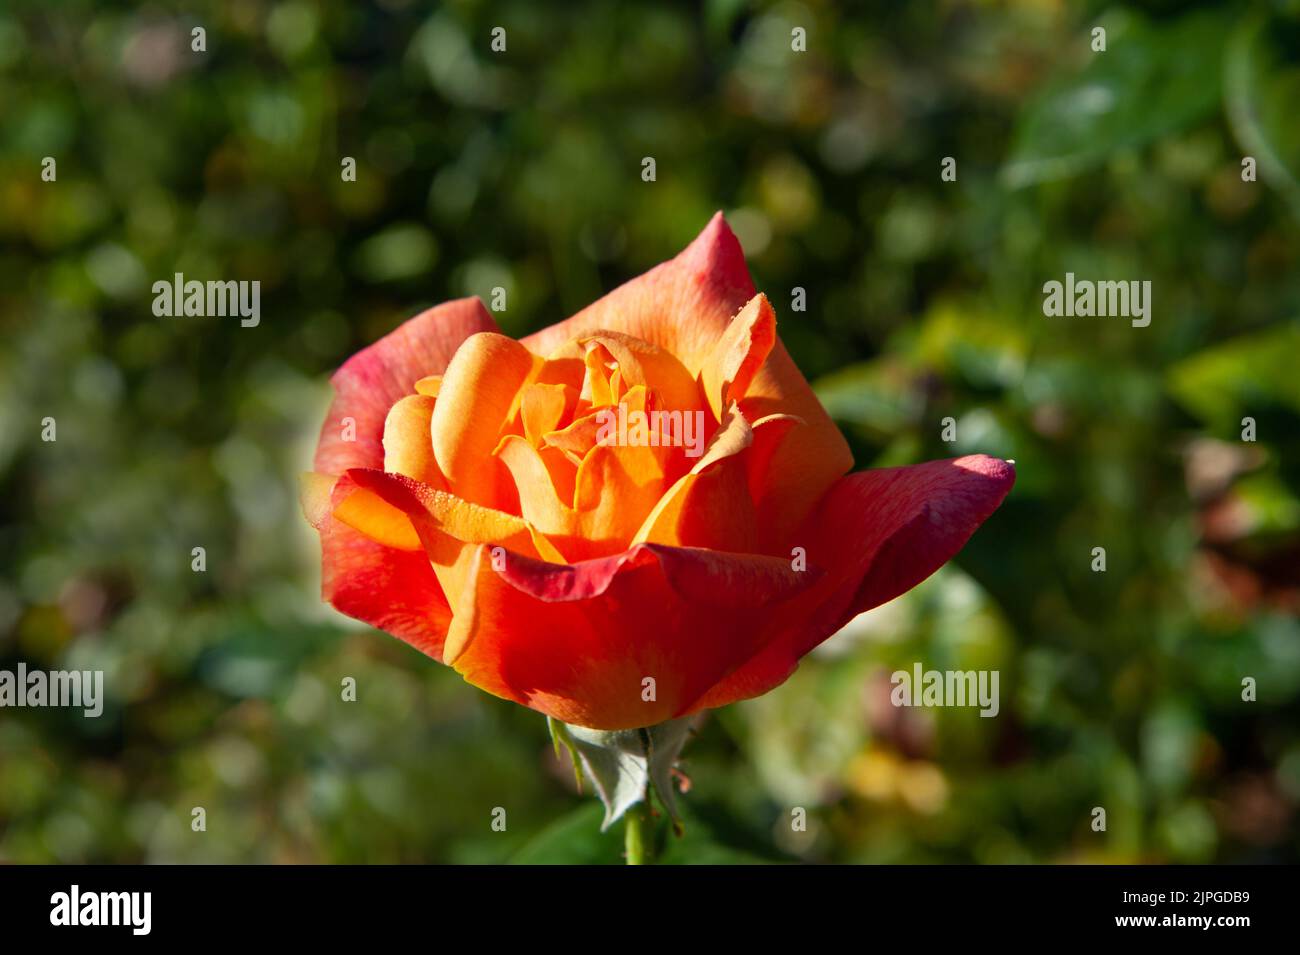 Beautiful yellow and red roses blossom in the garden on a sunny day Stock Photo